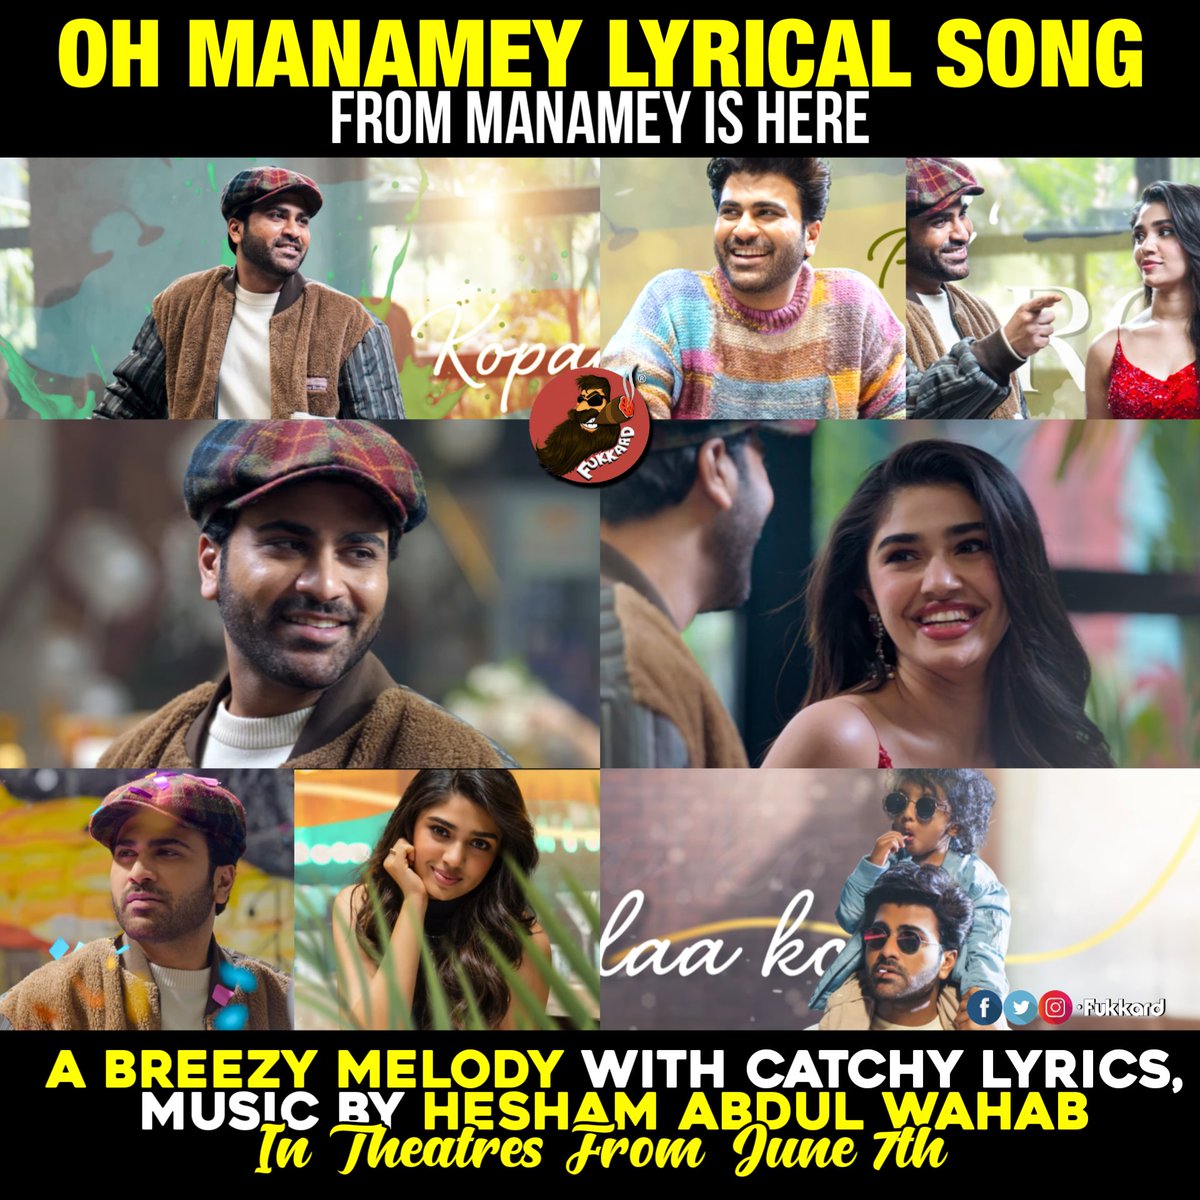 #OhManamey 2nd single from #Manamay out now - youtu.be/JiT0Gi2Hmk4 Worldwide grand release in theatres on June 7th✨ #ManameyOnJune7th